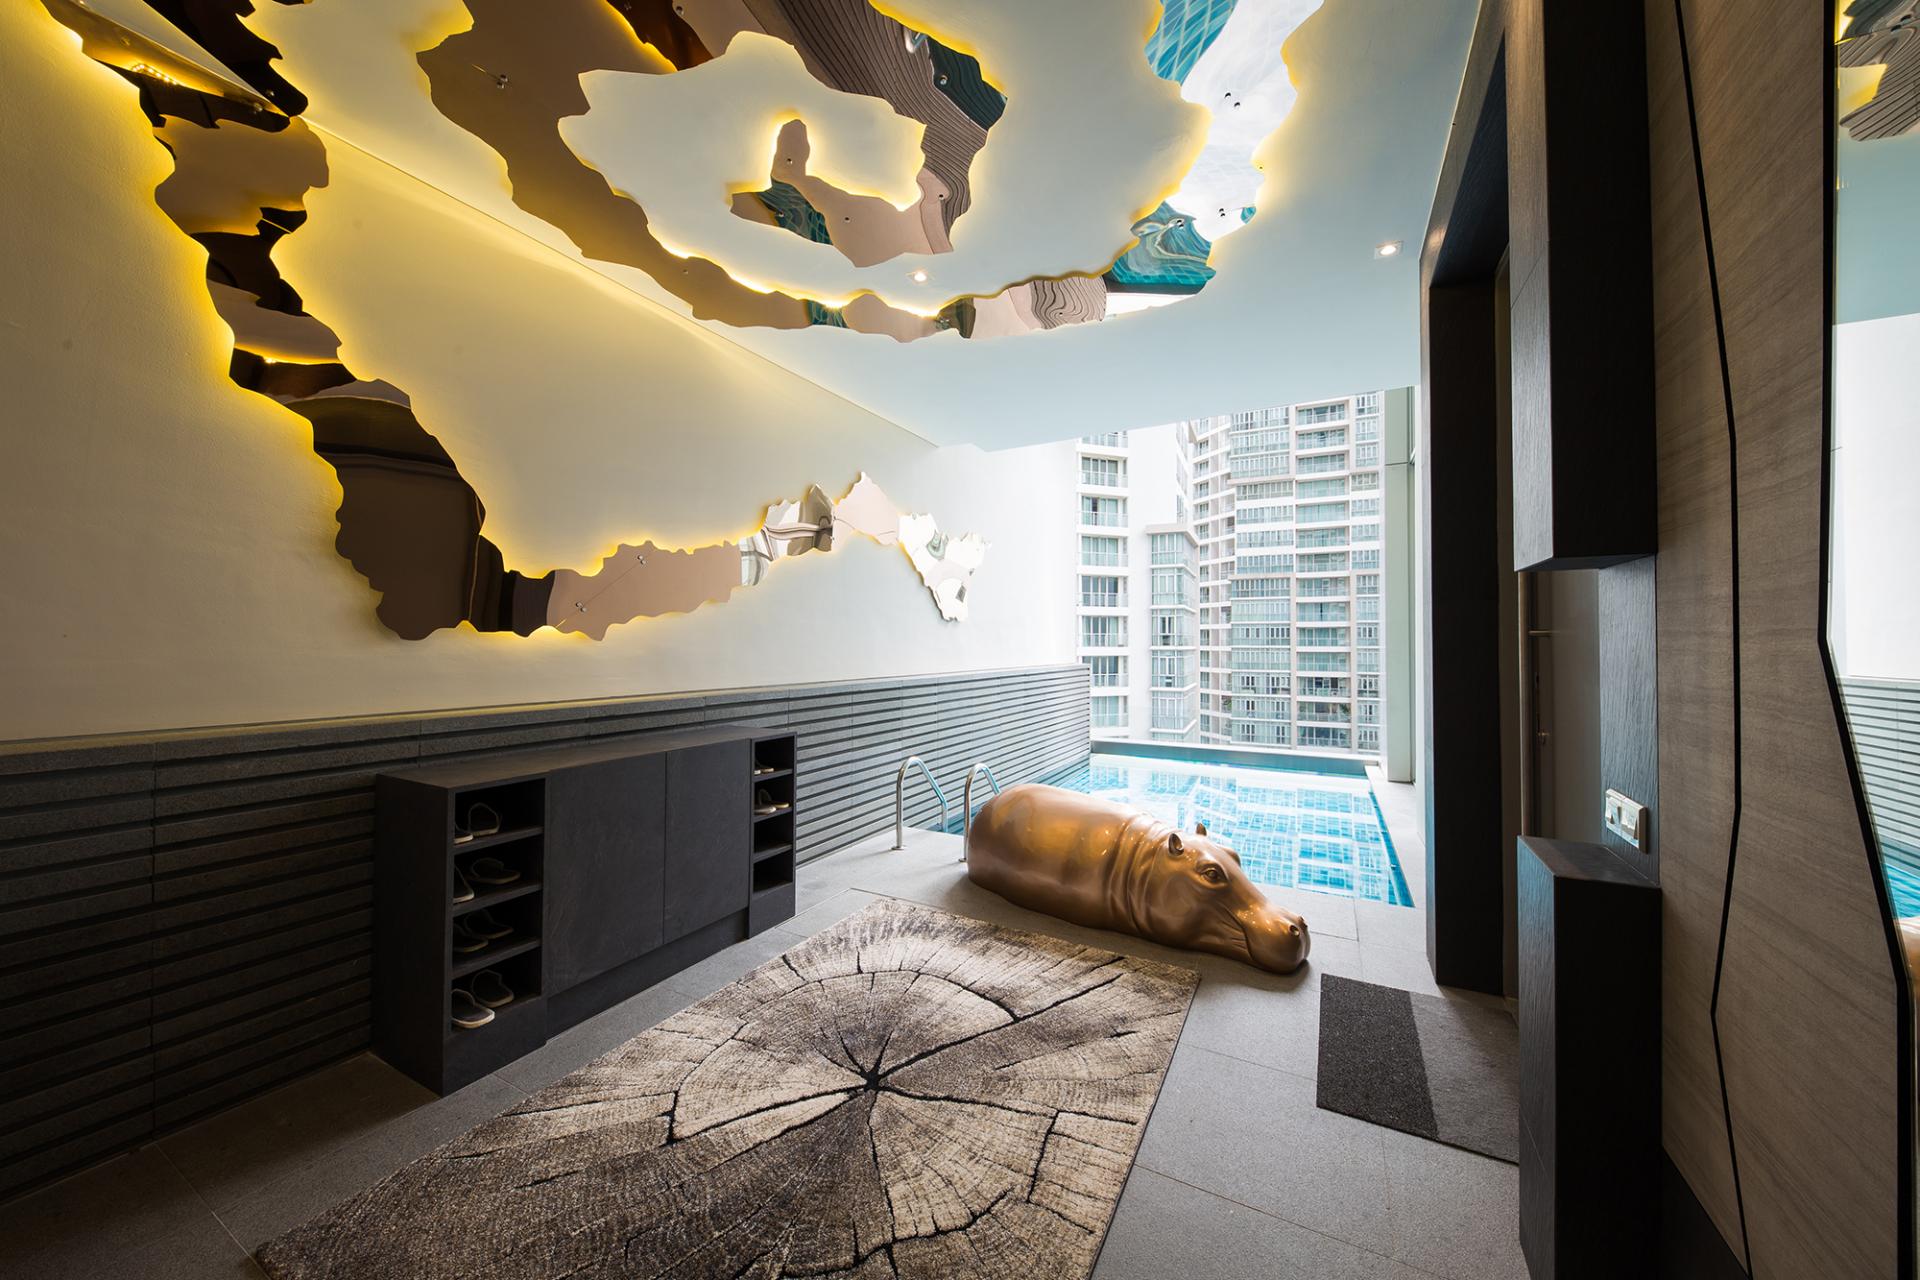 Explore a Grand Natural World Inside this Luxurious KL Apartment